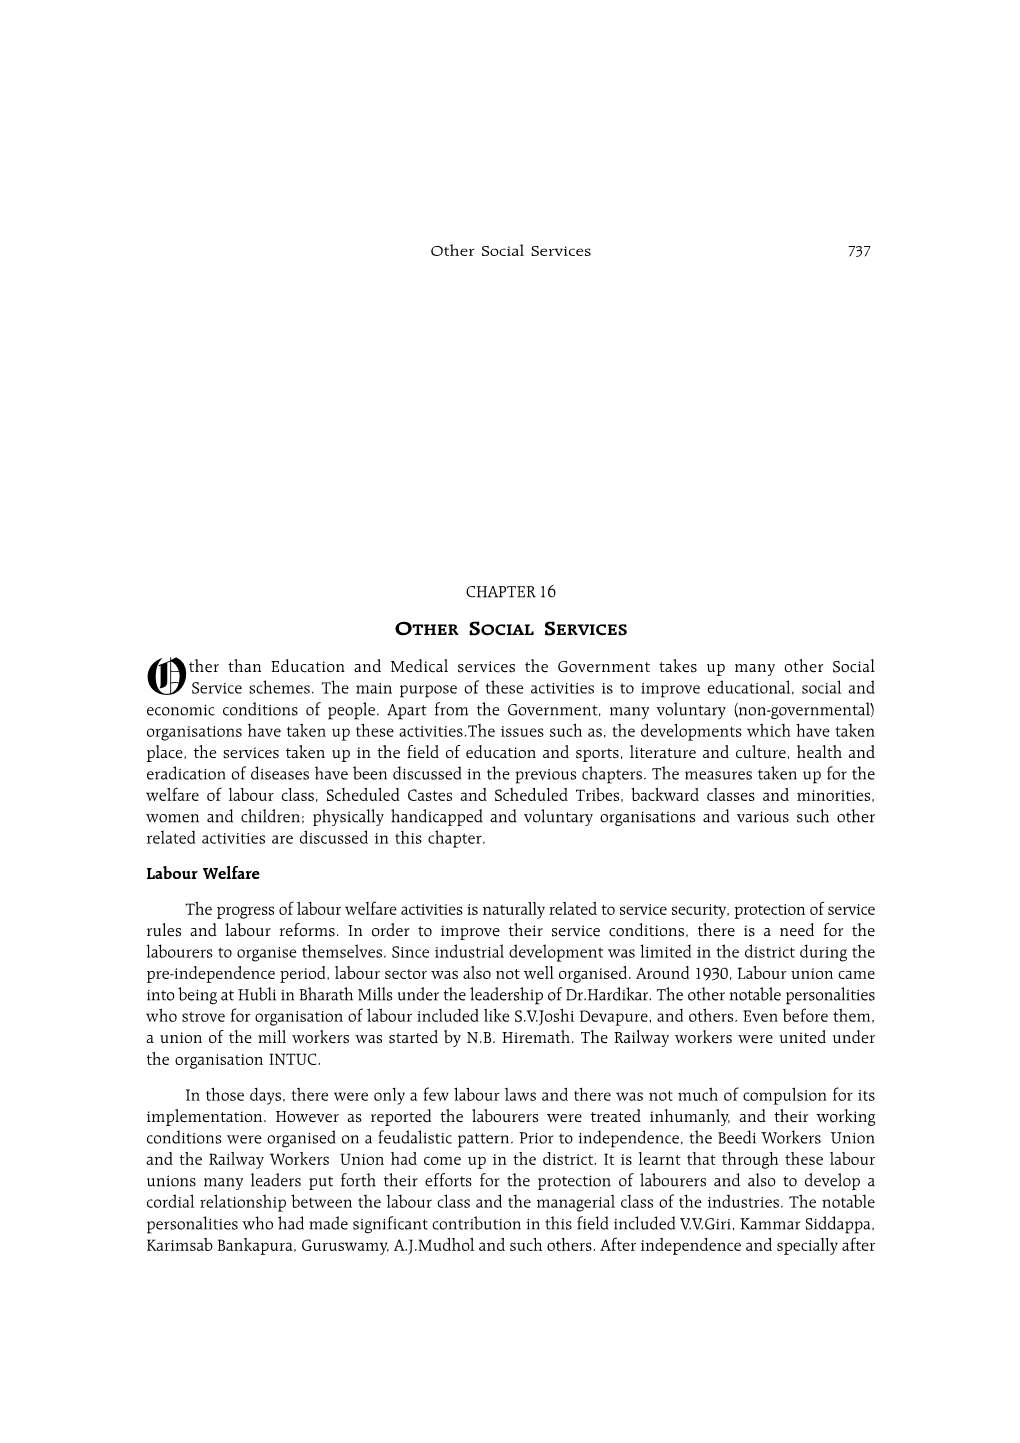 Chapter 16 Other Social Services.Pdf